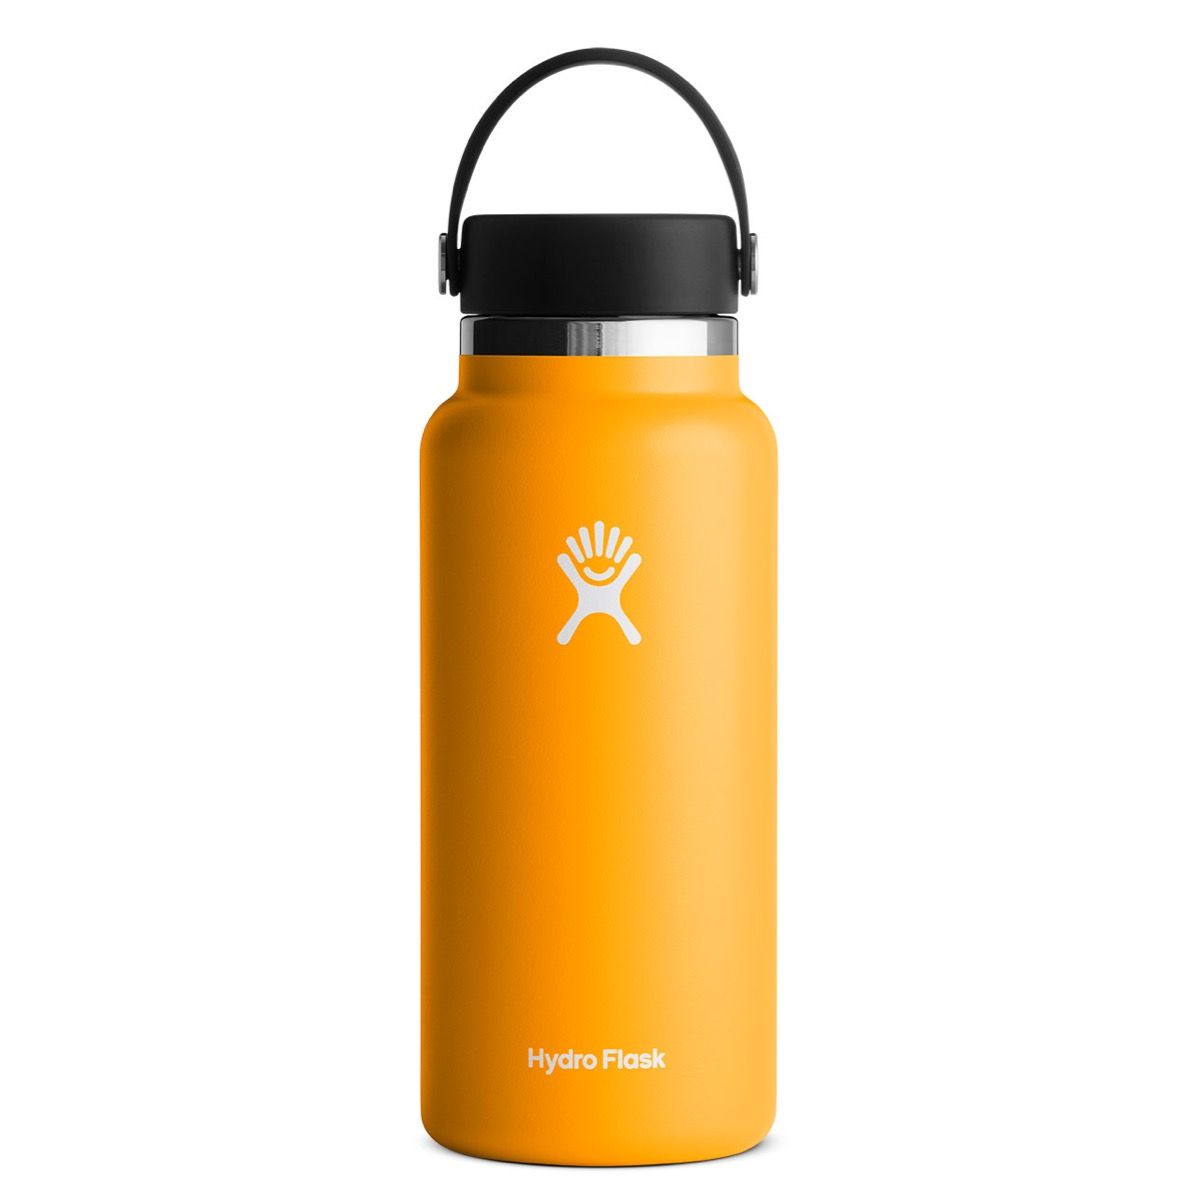 Hydro Flask - 32oz. Vacuum Insulated Stainless Steel Water Bottle Spring 2022 Colors all things being eco chilliwack starfish